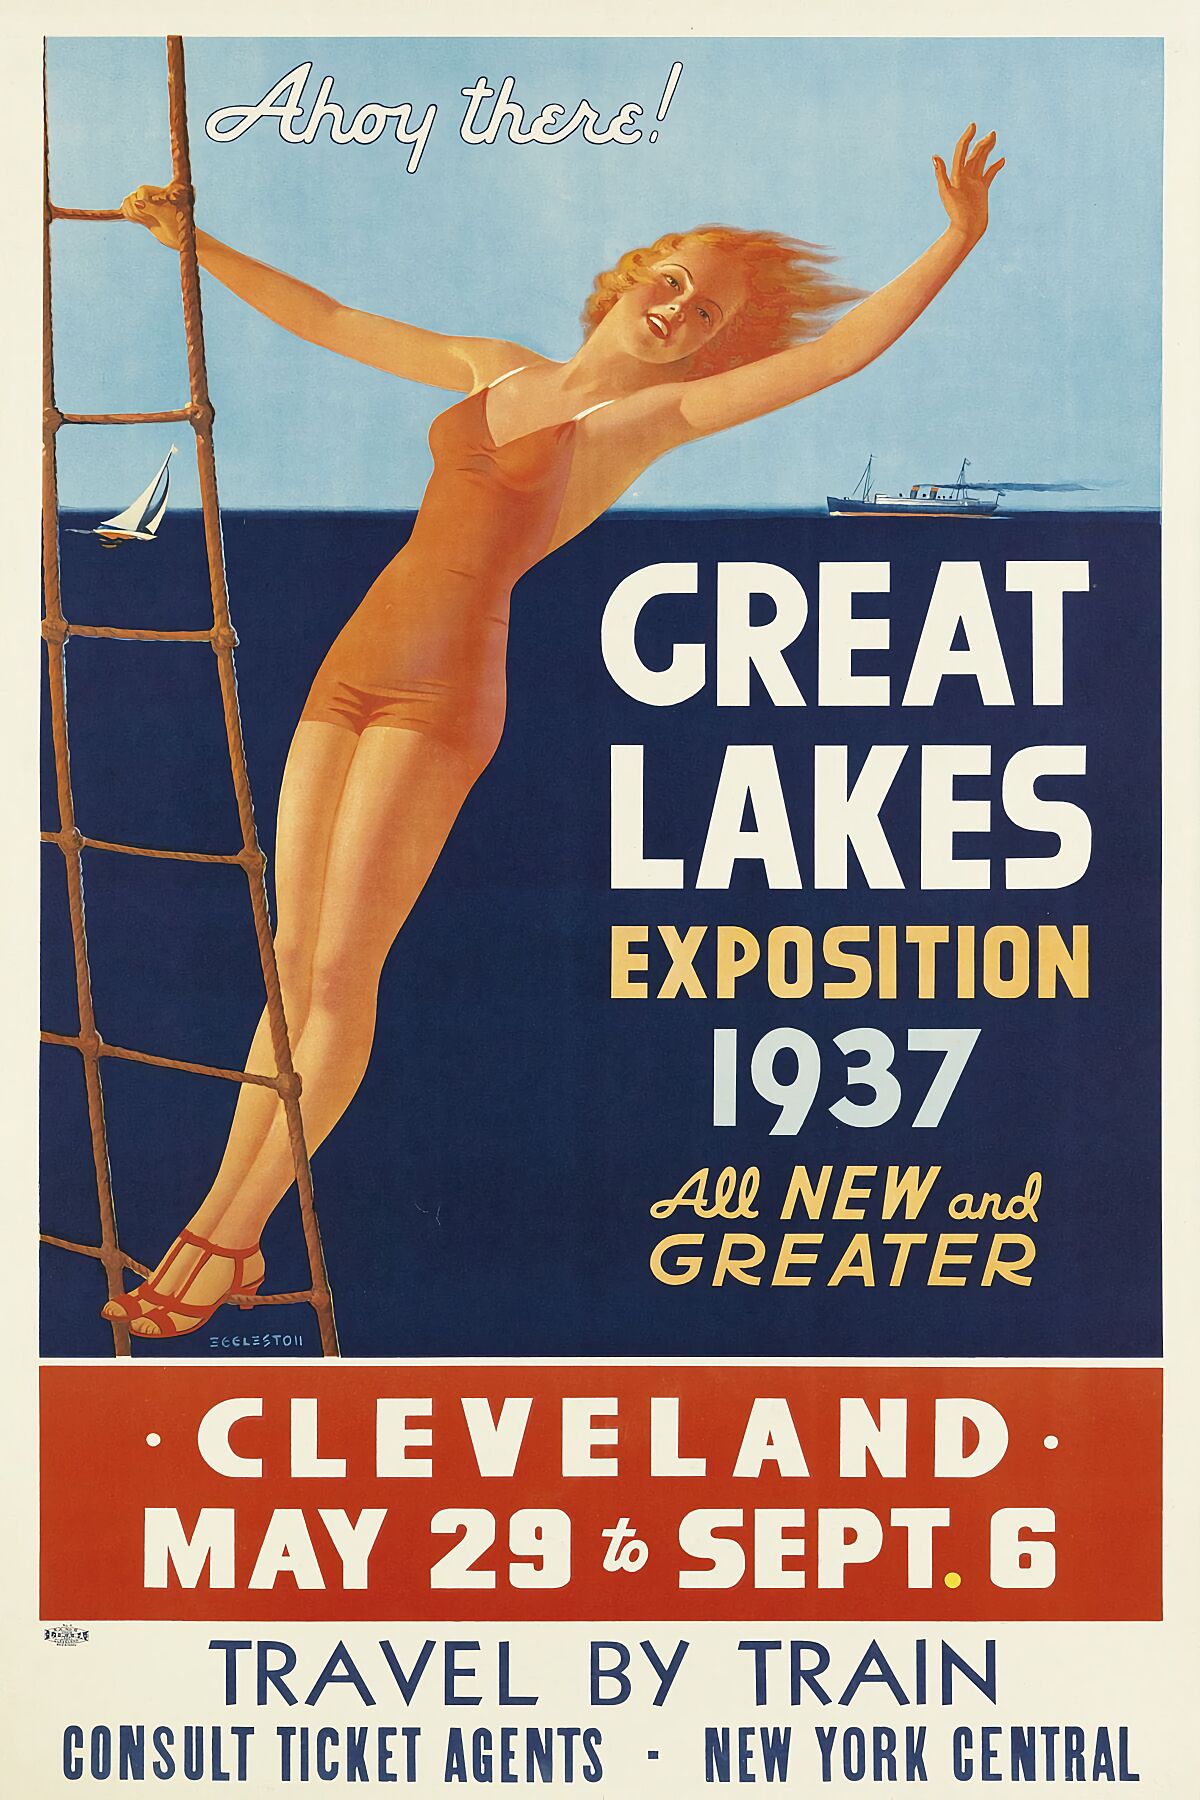 Great Lakes Exposition, Cleveland by Edward Eggleston - 1937